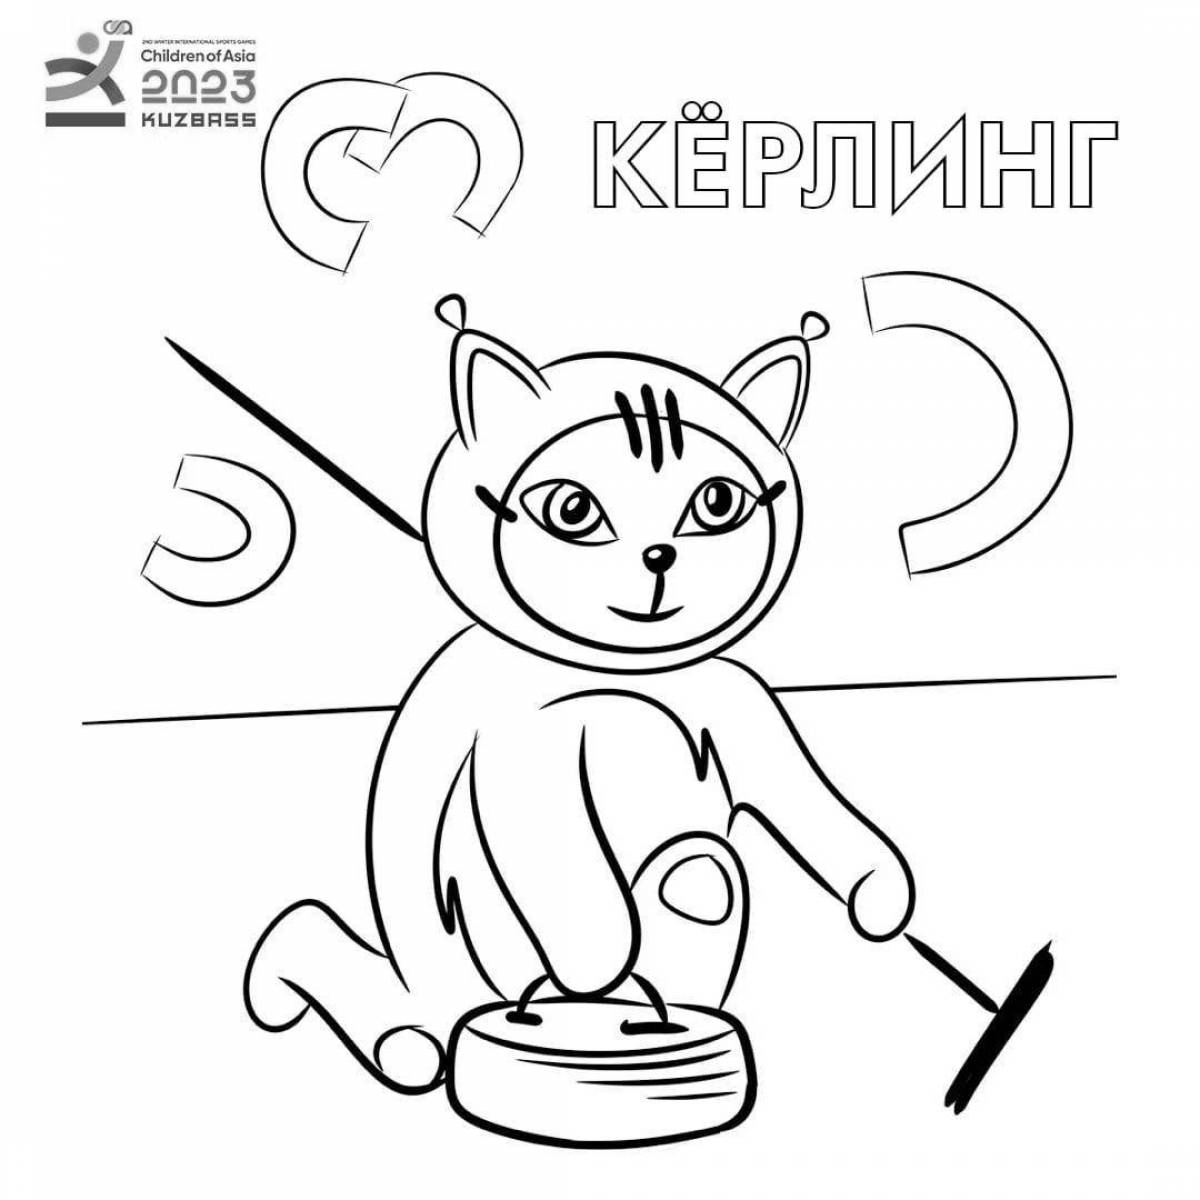 Fun coloring page create a coloring page from a picture